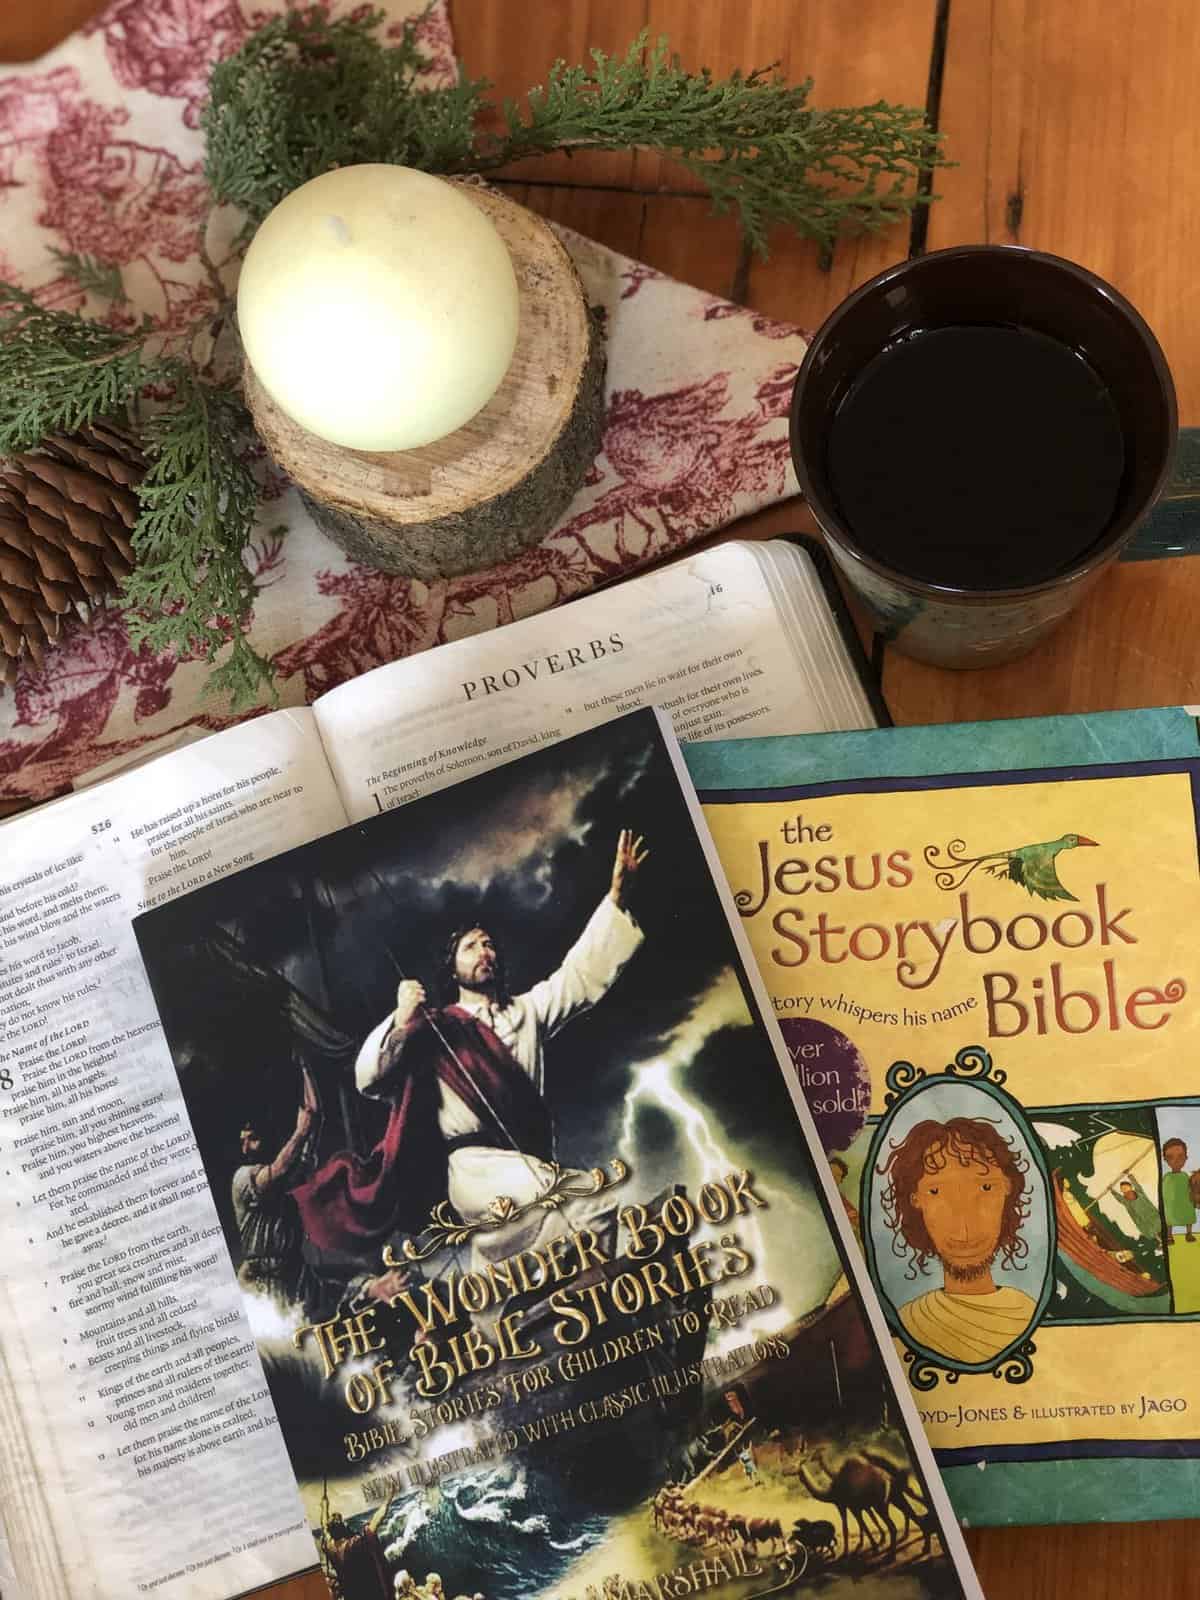 a Bible, story Bibles, coffee and candle